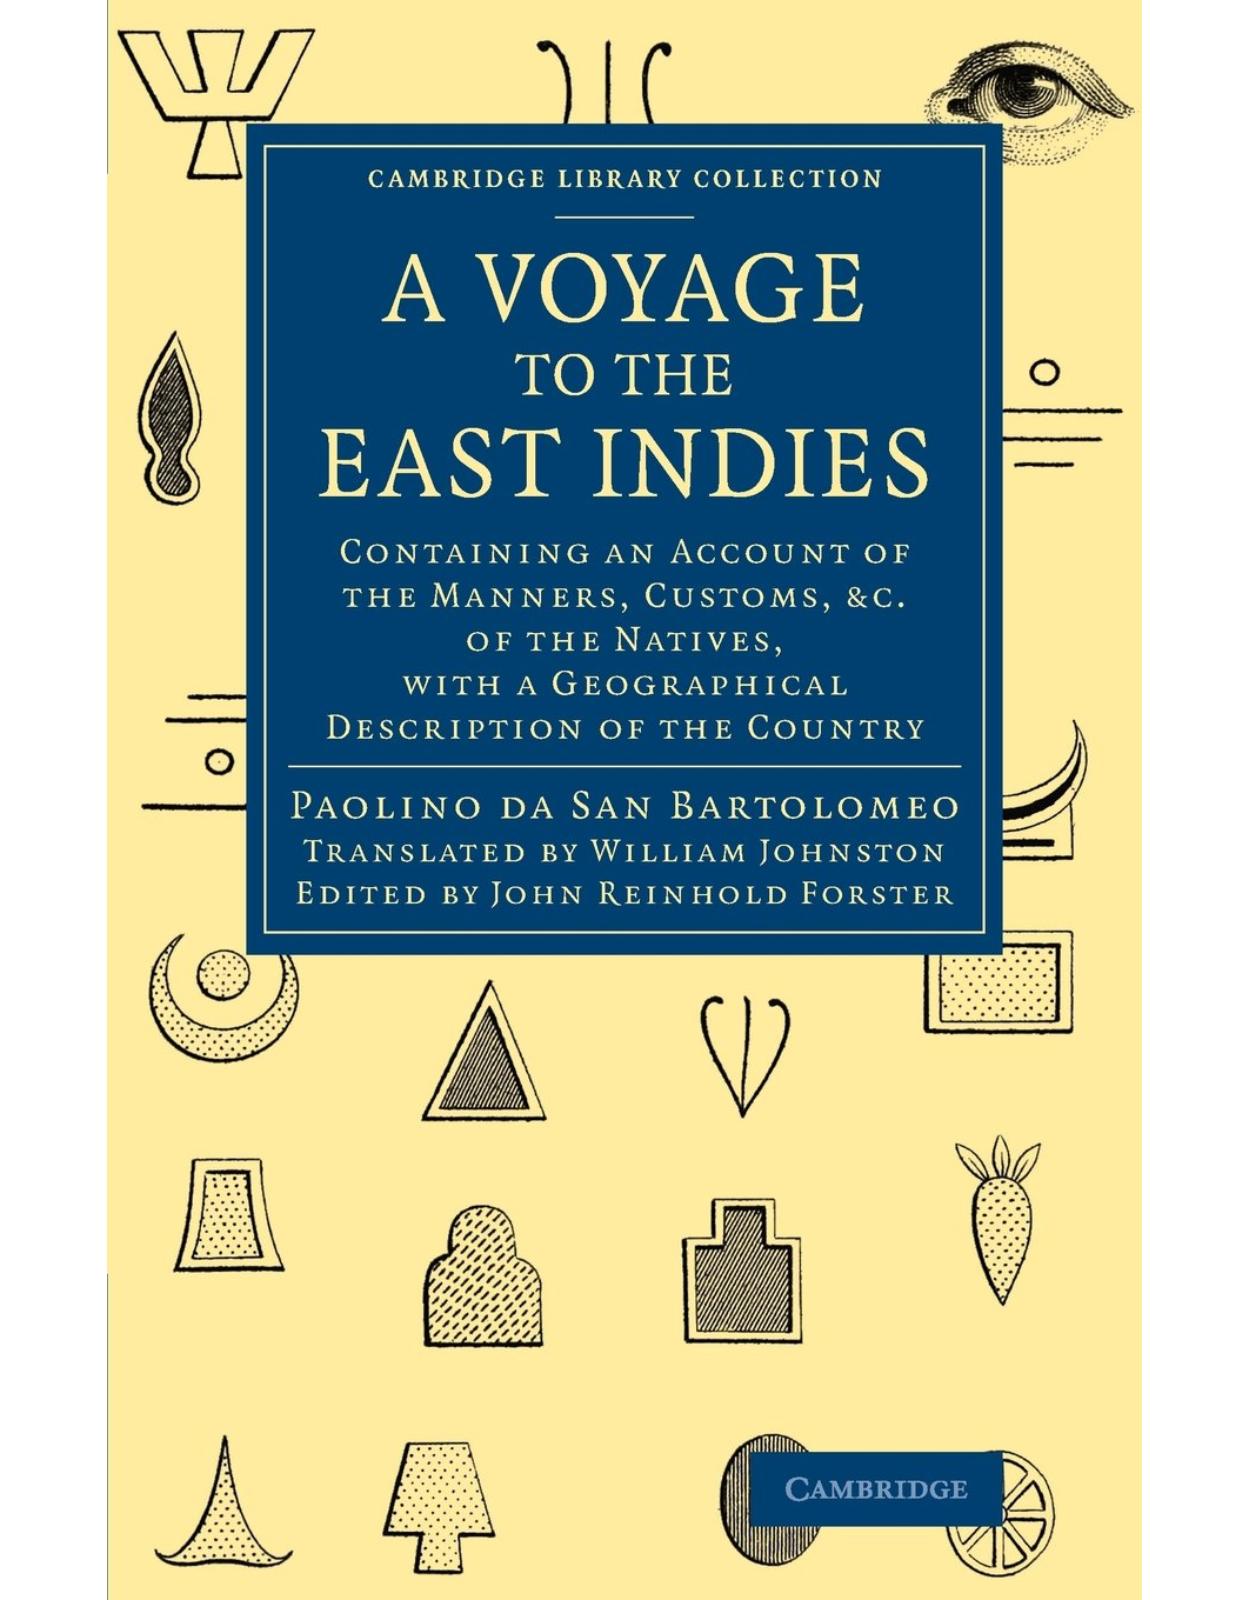 A Voyage to the East Indies: Containing an Account of the Manners, Customs, etc of the Natives, with a Geographical Description of the Country ... Collection - Travel and Exploration in Asia)